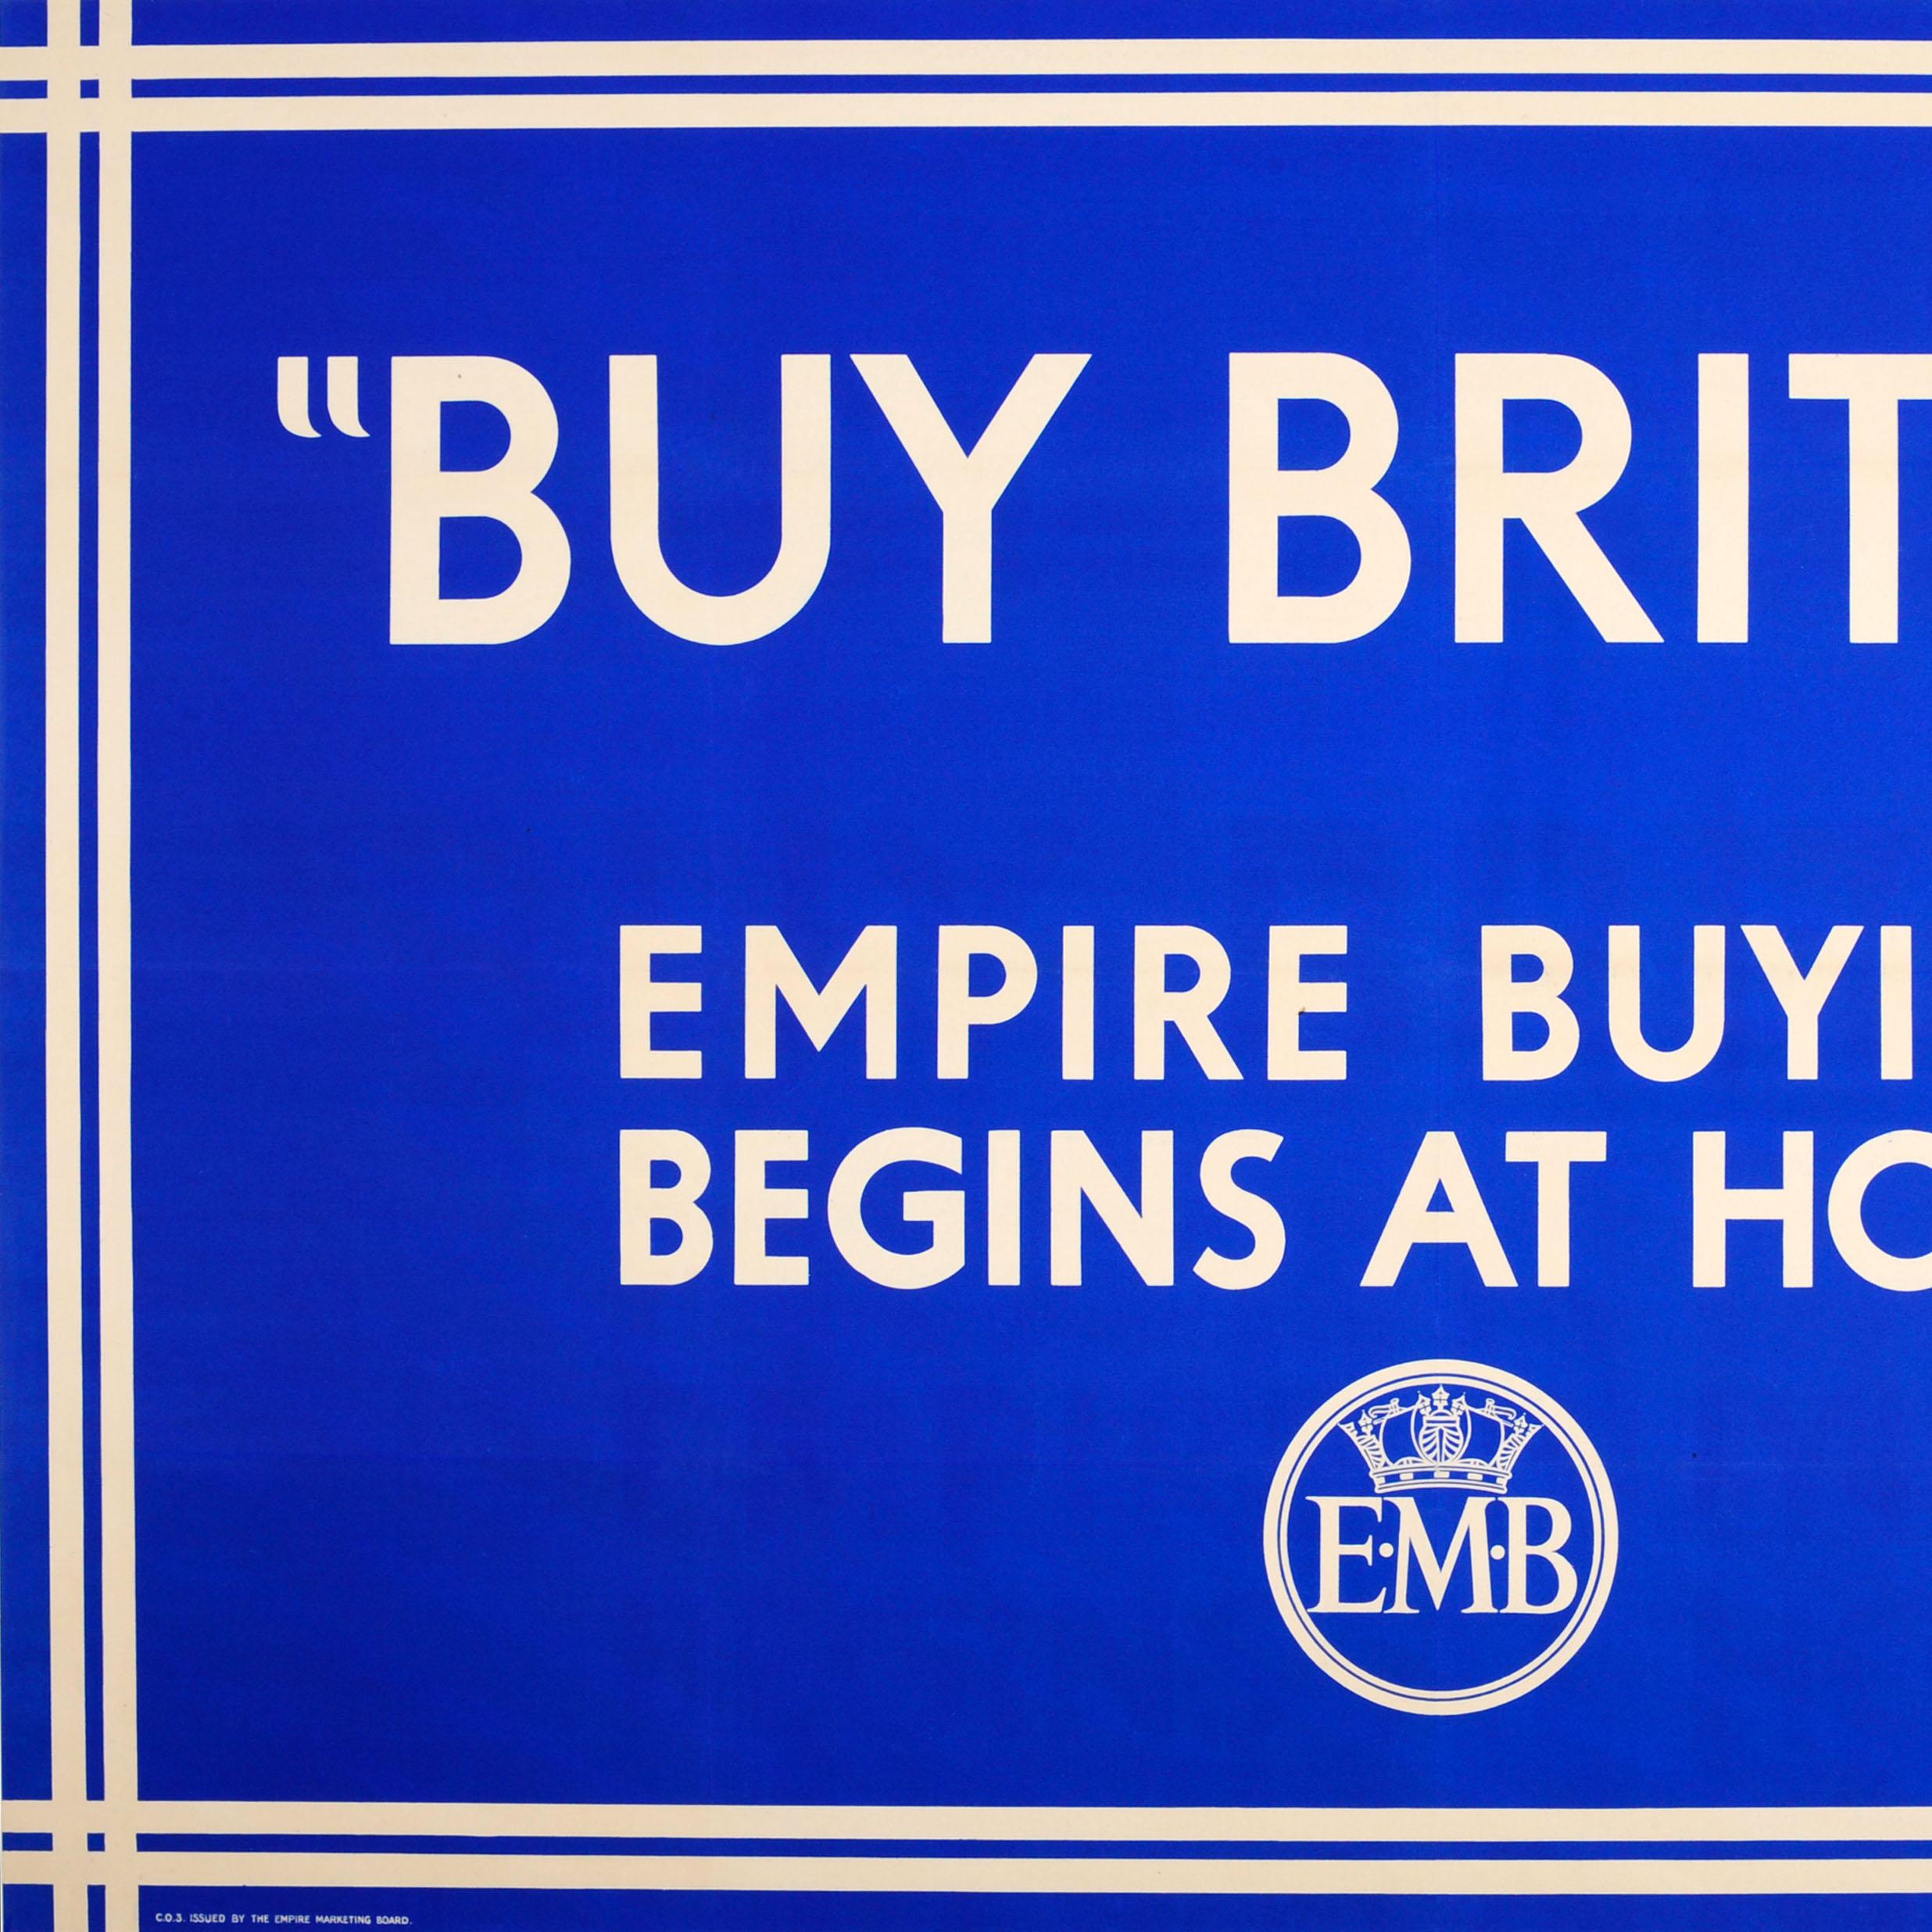 Original Vintage Advertising Poster Buy British Empire Buying Begins At Home EMB - Blue Print by Unknown